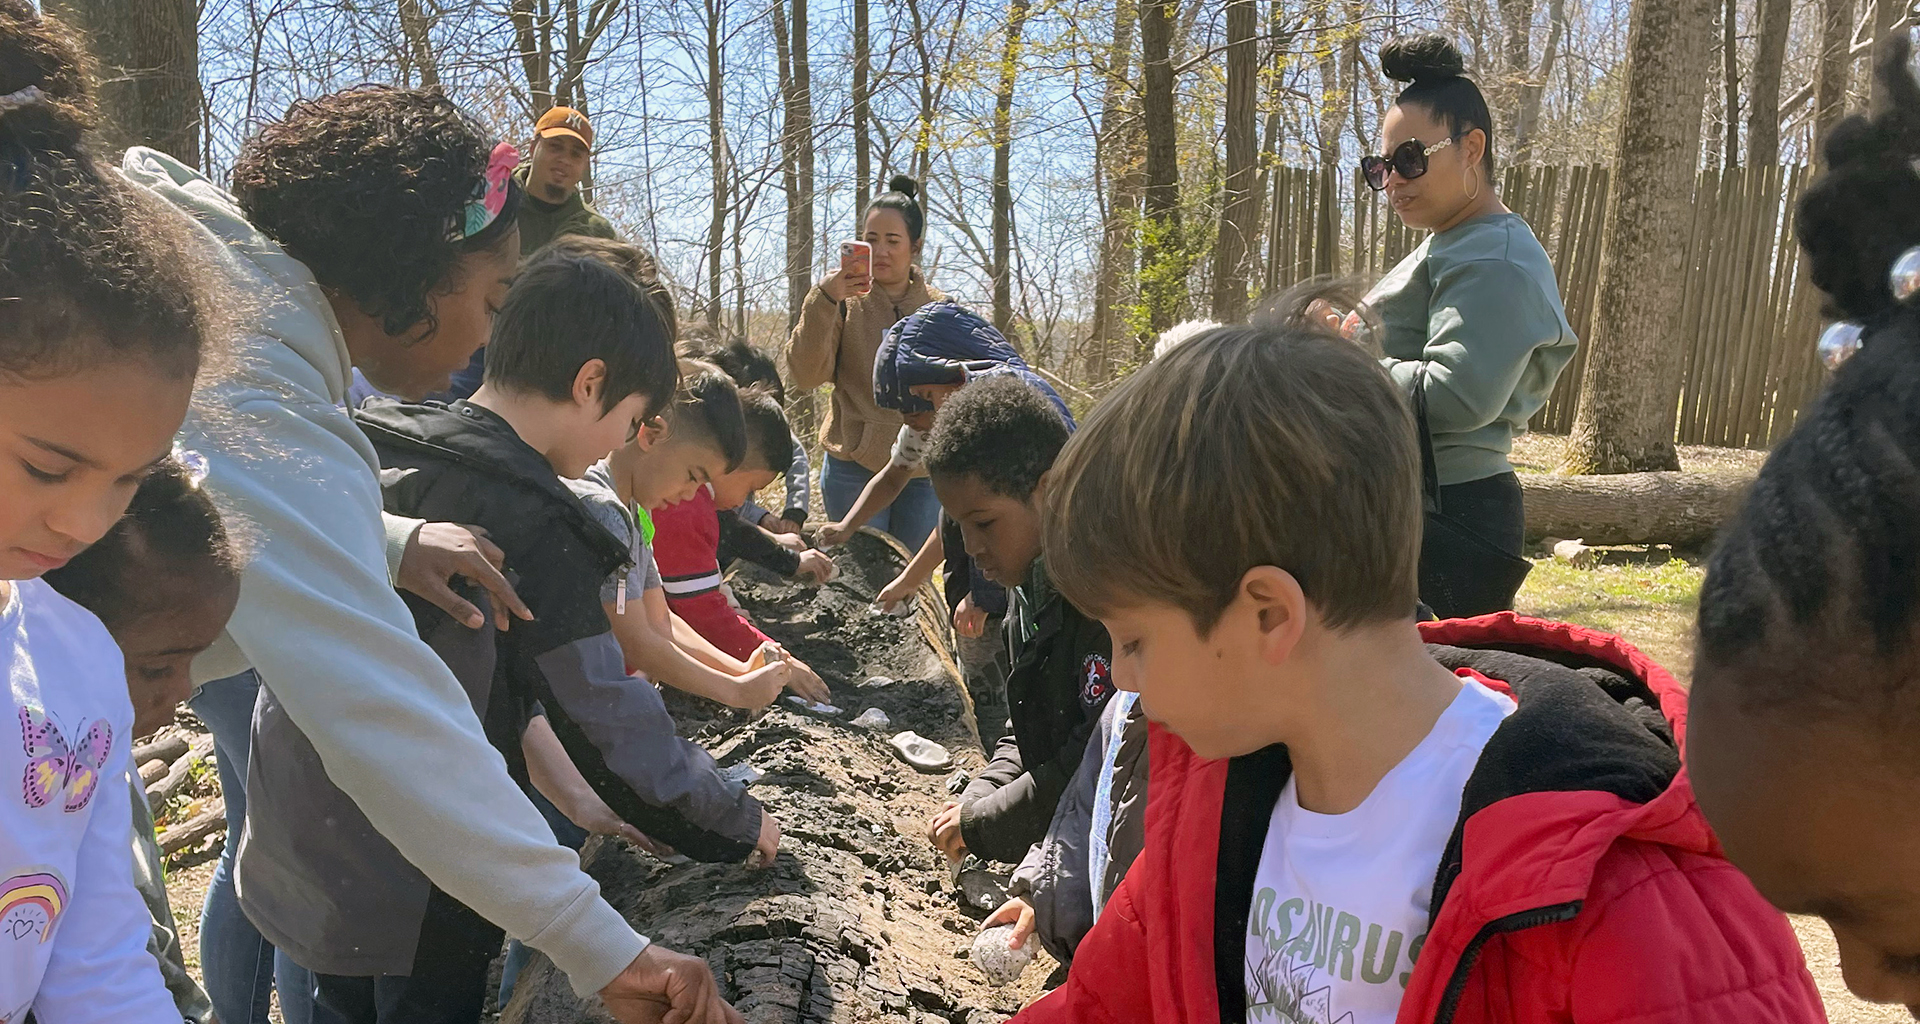 Students outside on a field trip digging for fossils.